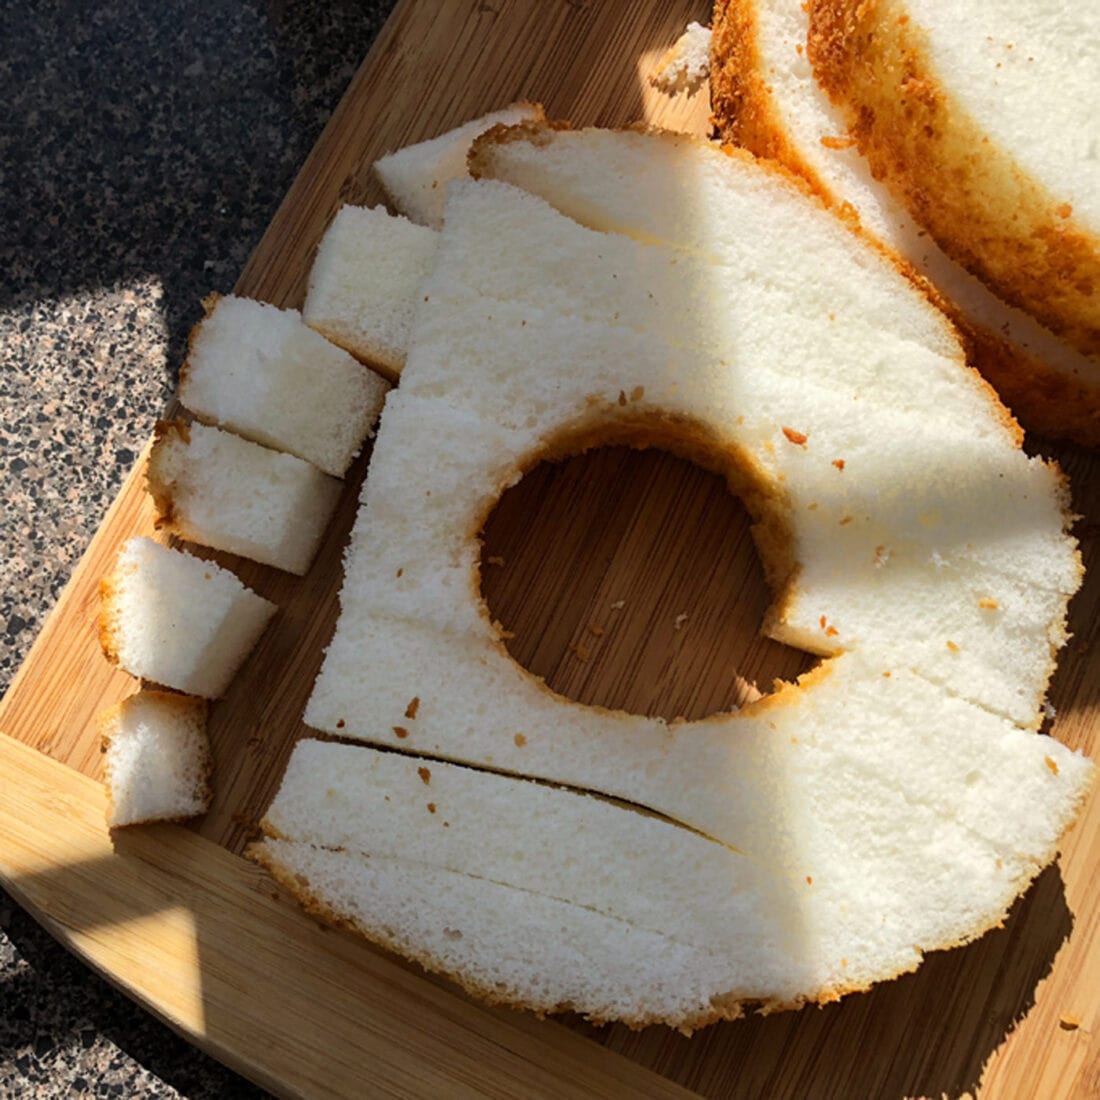 Cutting angel food cake into cubes